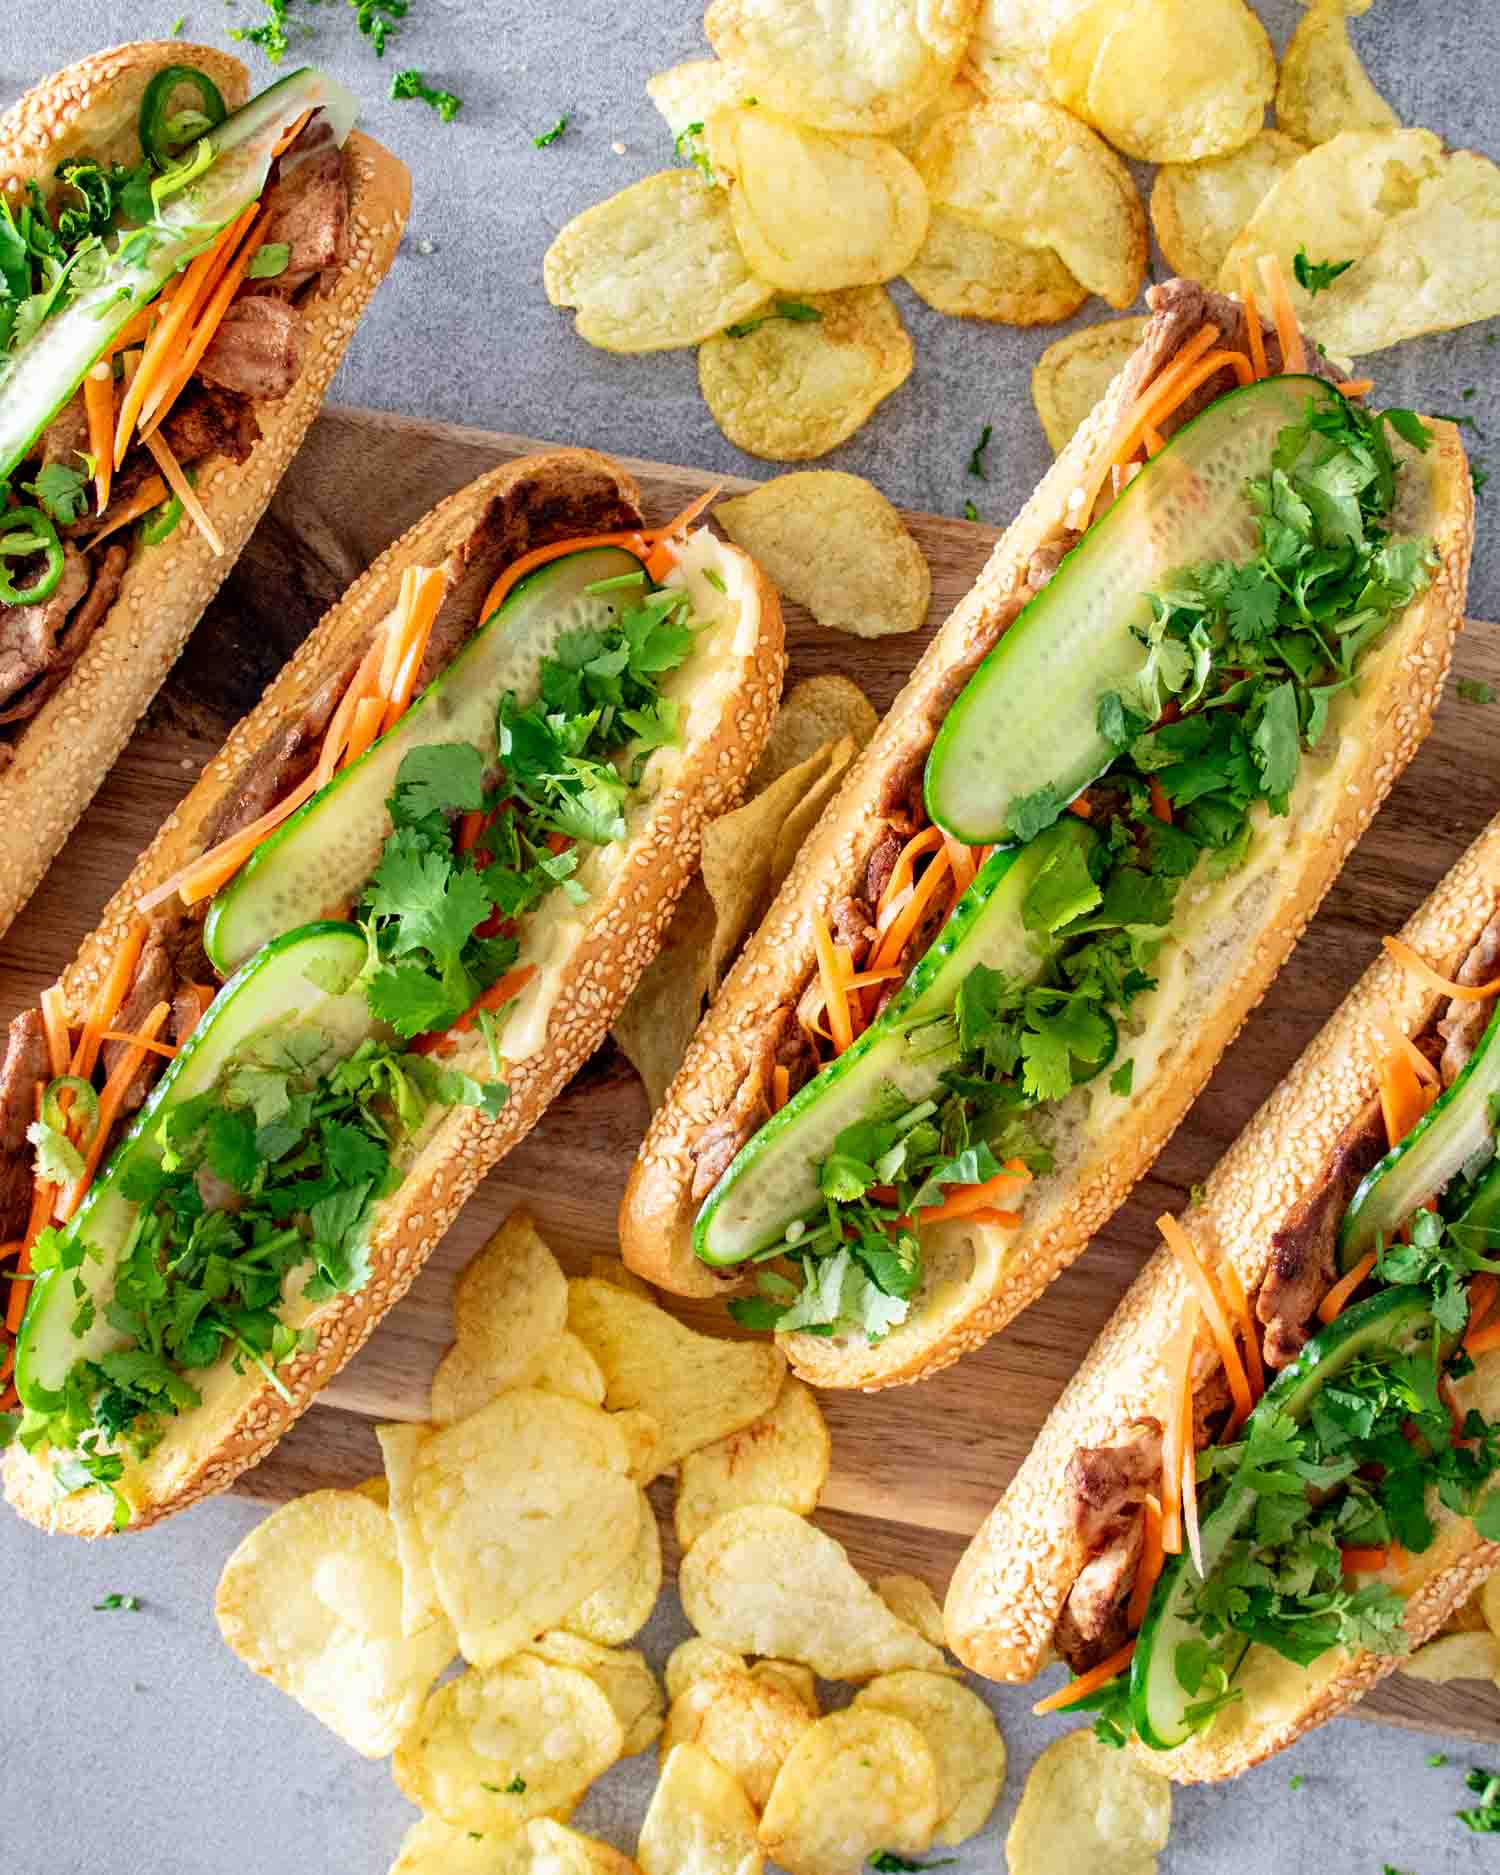 4 banh mi sandwiches on a cutting board with some chips around it.